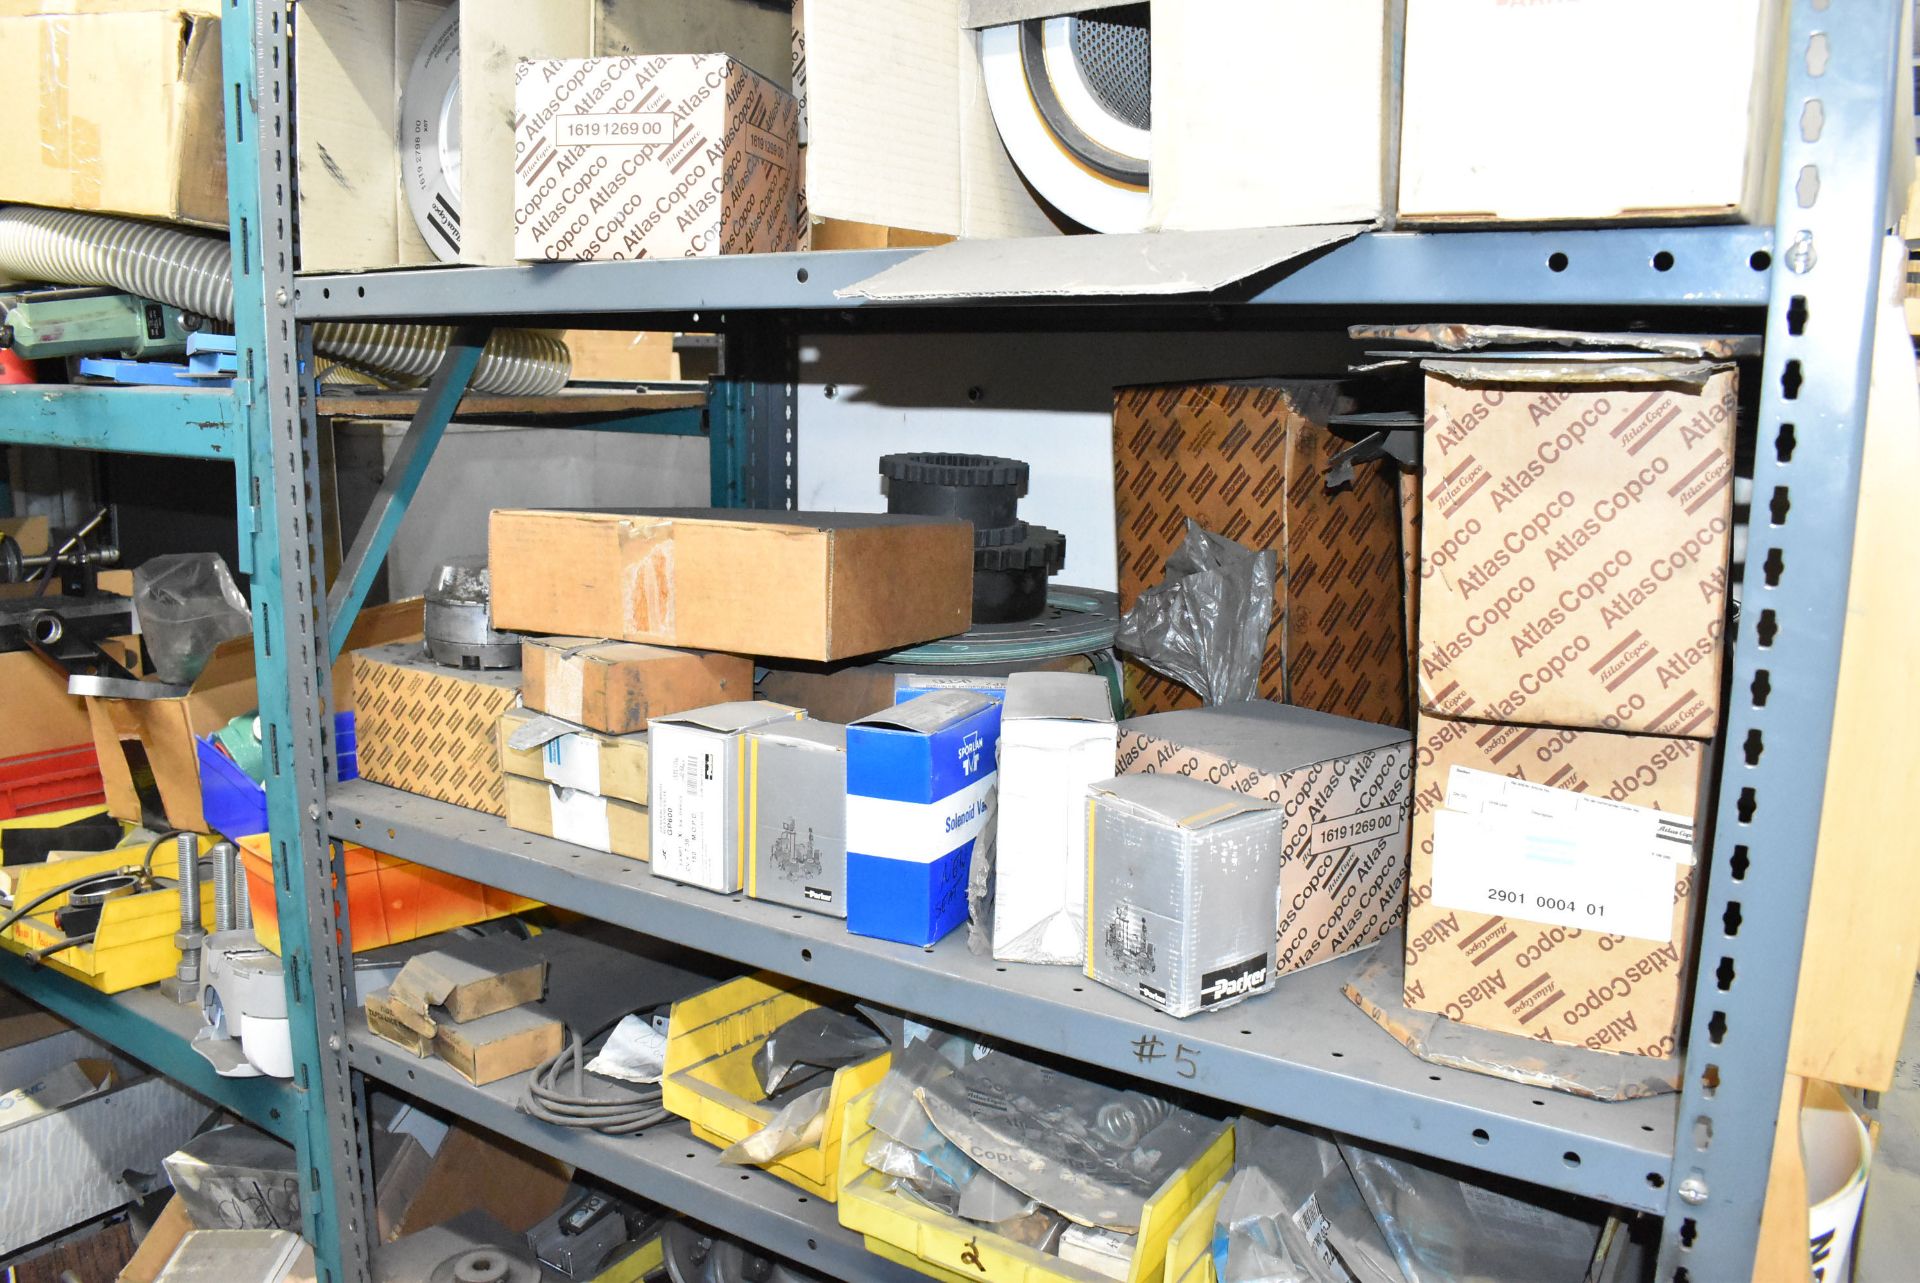 LOT/ (2) SECTIONS OF STEEL SHELVING WITH CONTENTS - INCLUDING AIR FILTERS, SPROCKETS, GEARS, BELTS - Image 5 of 11